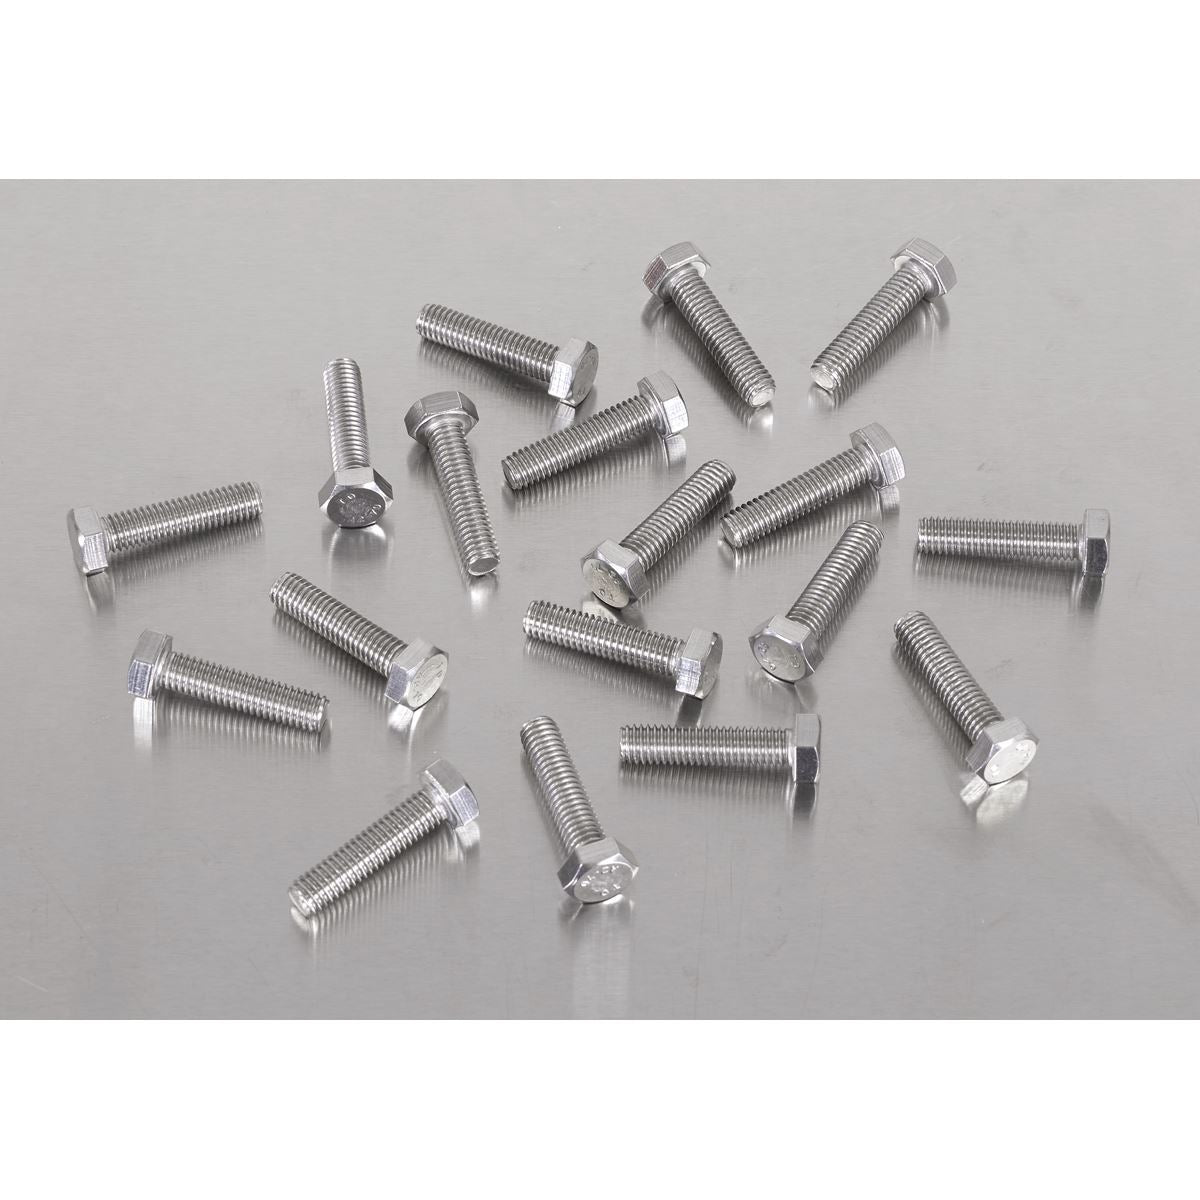 Sealey Stainless Steel Set Screw Din 933 – M6 x 25mm 1.00mm Pitch - Pack of 50